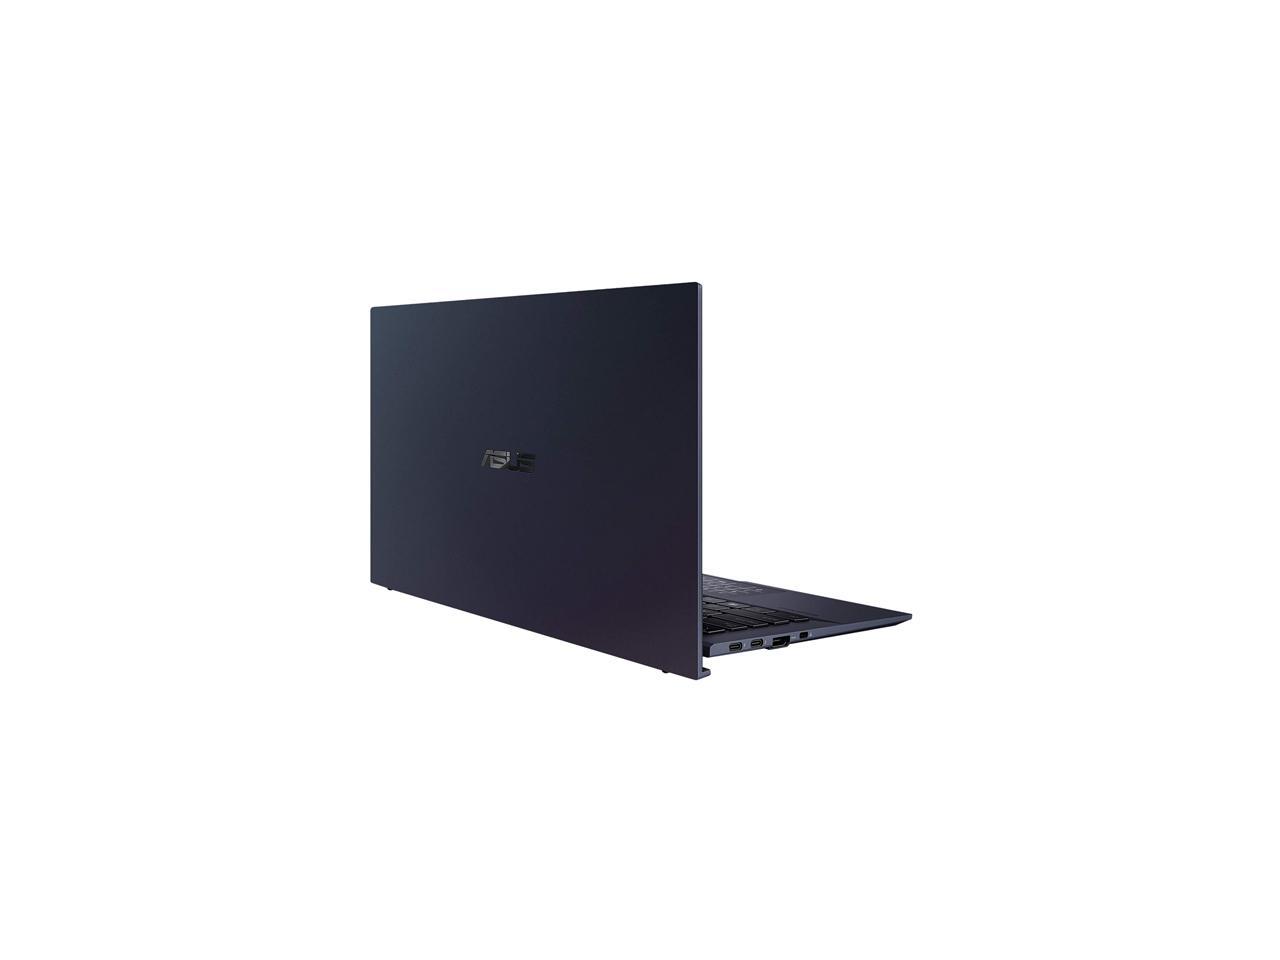 ASUS ExpertBook B9450 Thin and Light Business Laptop, 14" FHD, Intel Core i7-10510U Processor, 512 GB PCIe SSD, 16 GB RAM, Windows 10 Pro, Up to 24 Hrs Battery Life, Sleeve, B9450FA-XS74